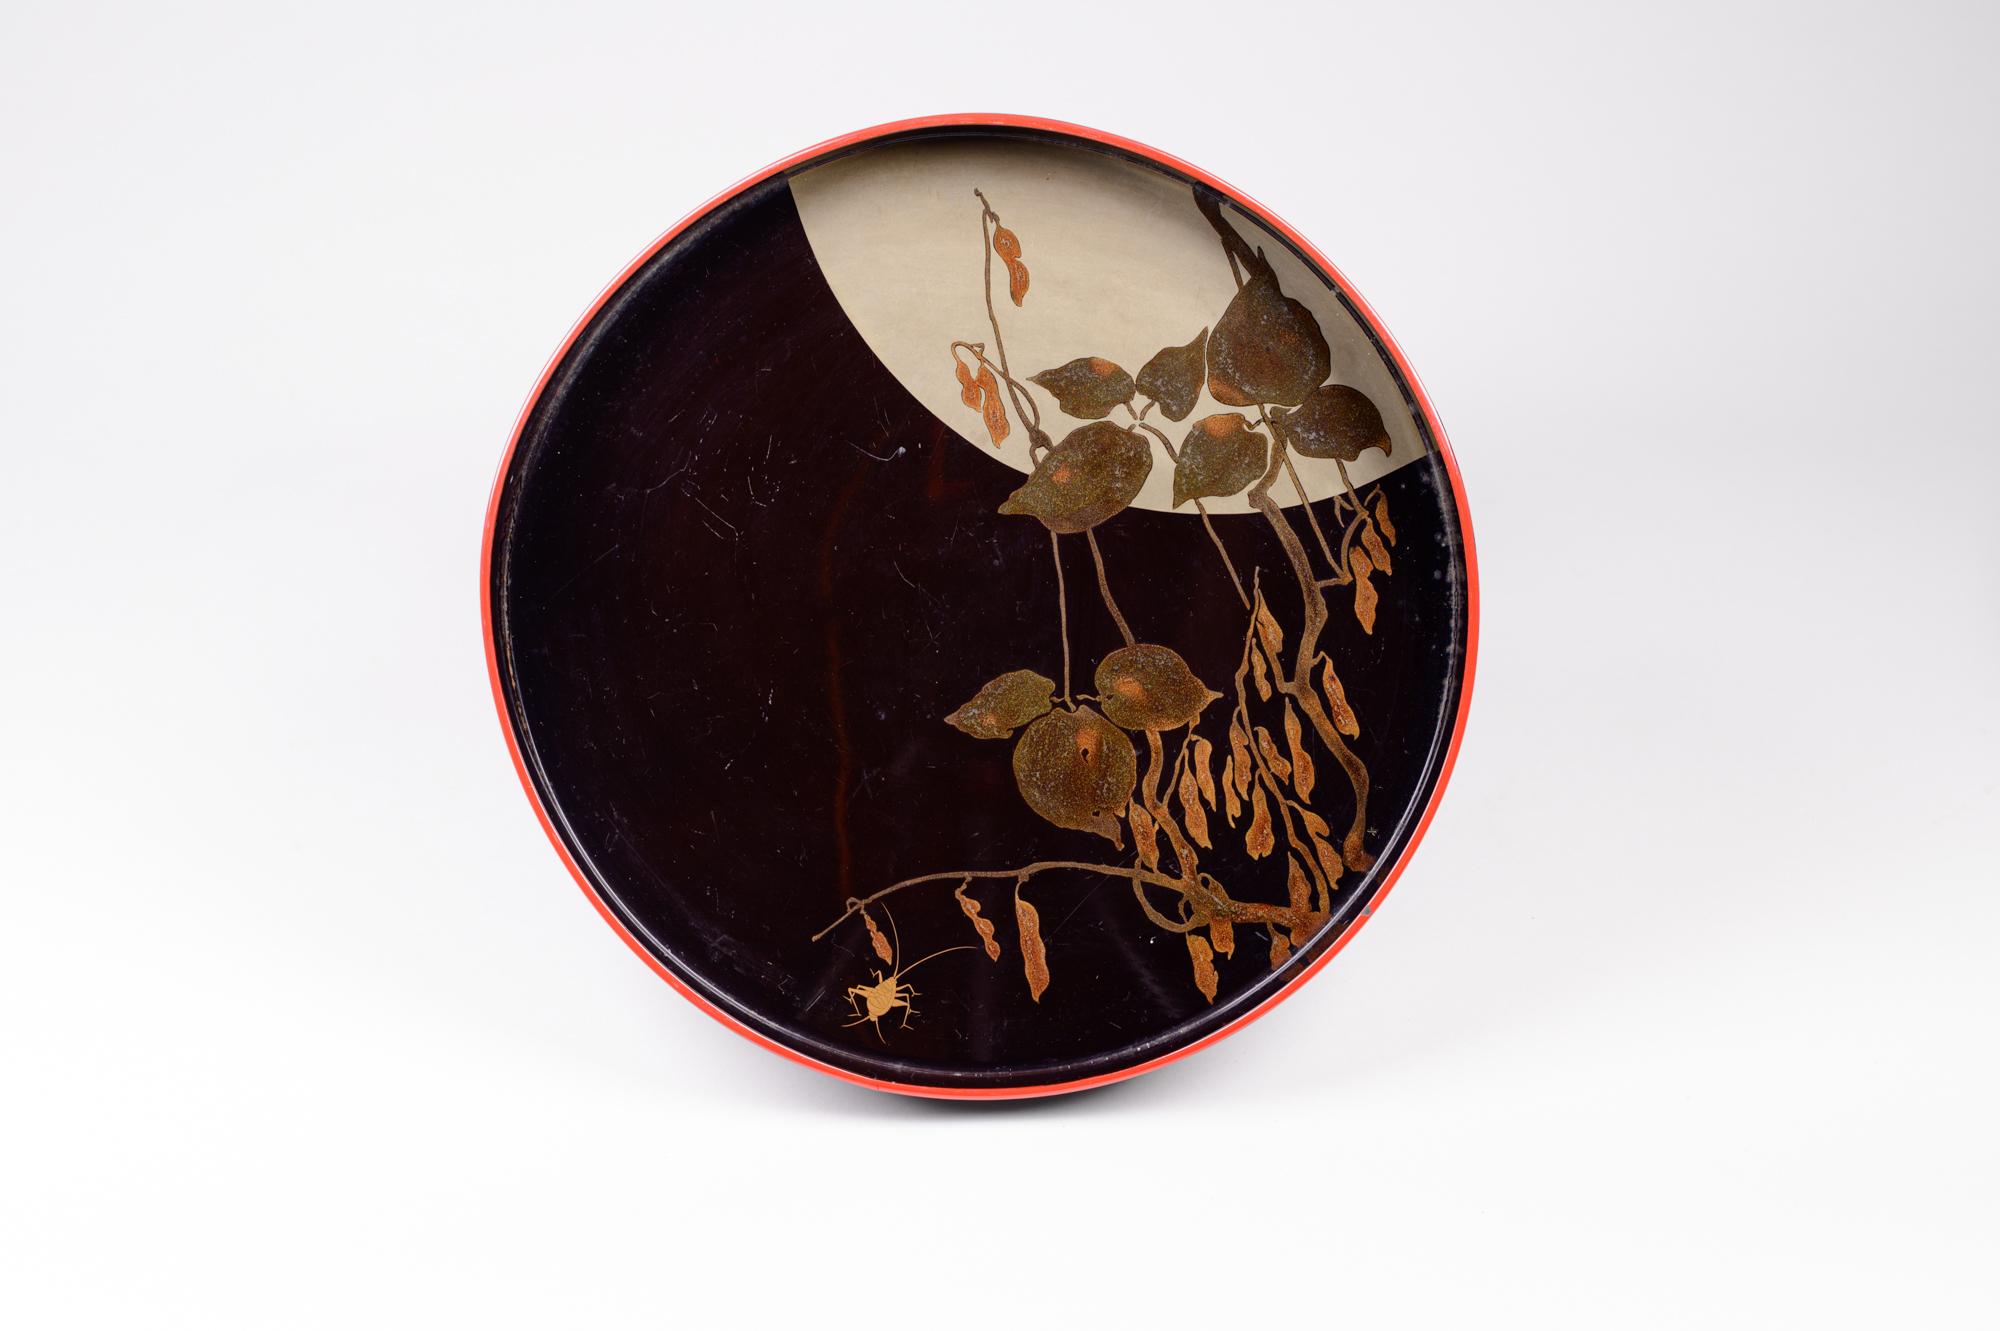 Pair of antique Japanese Lacquer Trays, Taisho period (1912-1926) beautifully decorated with a miniature landscape of pea pods on the vine and a gold cricket set against a large, full silver moon. Beautiful use of scale within the imagery.